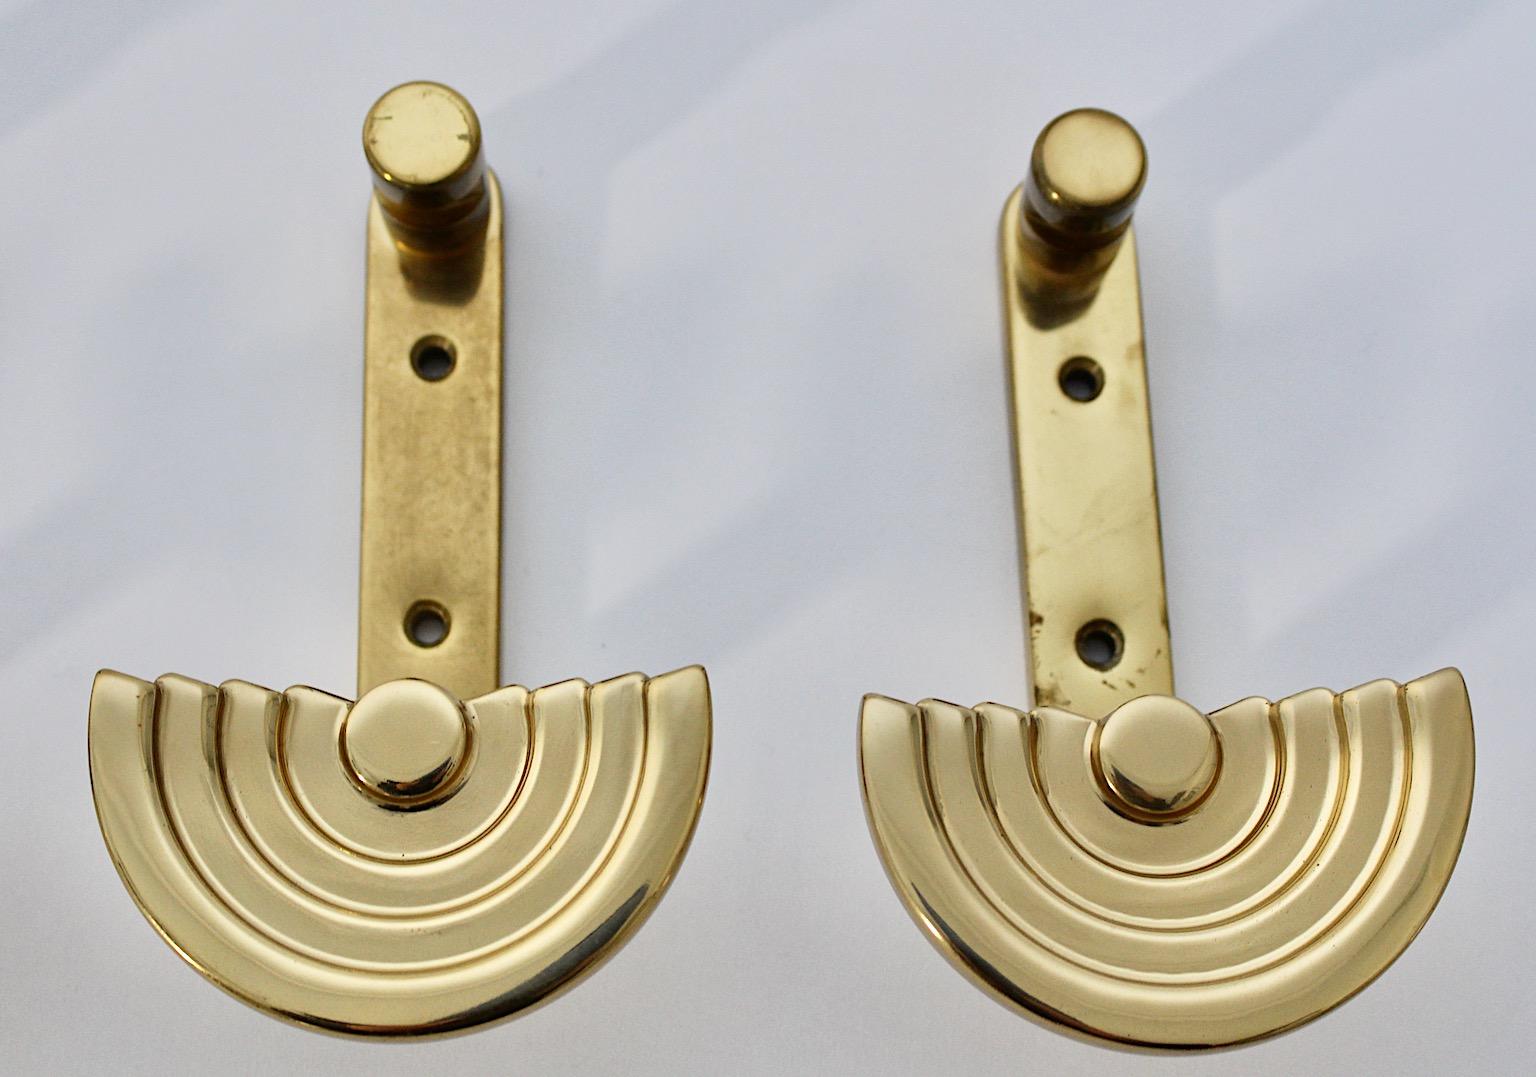 Ettore Sottsass Vintage Brass Four Wall Hooks or Coat Hooks circa 1985 Italy For Sale 4